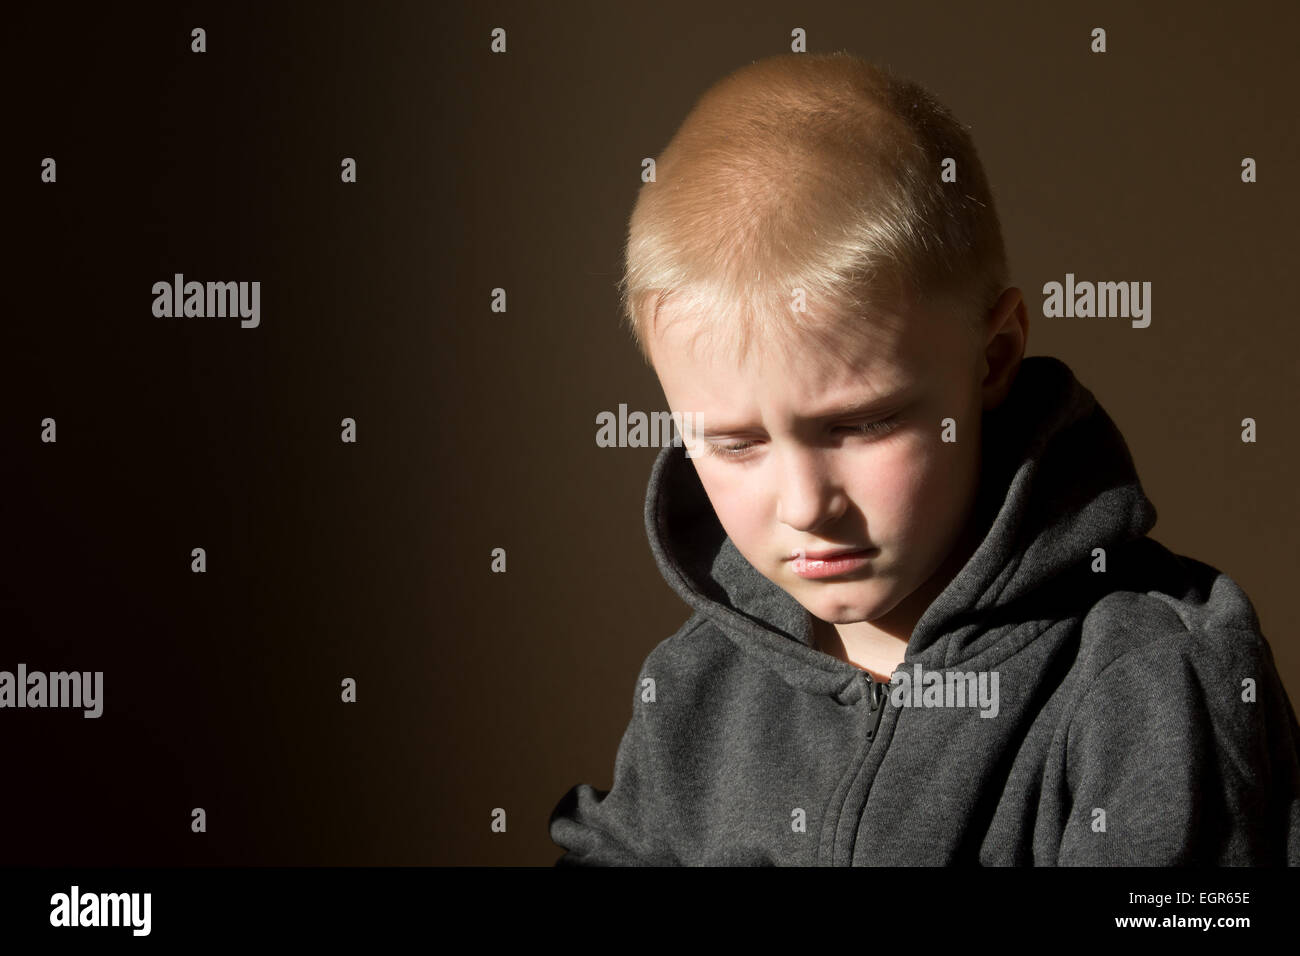 Sad upset tired worried unhappy little child (boy) close up horizontal dark portrait with copy space Stock Photo